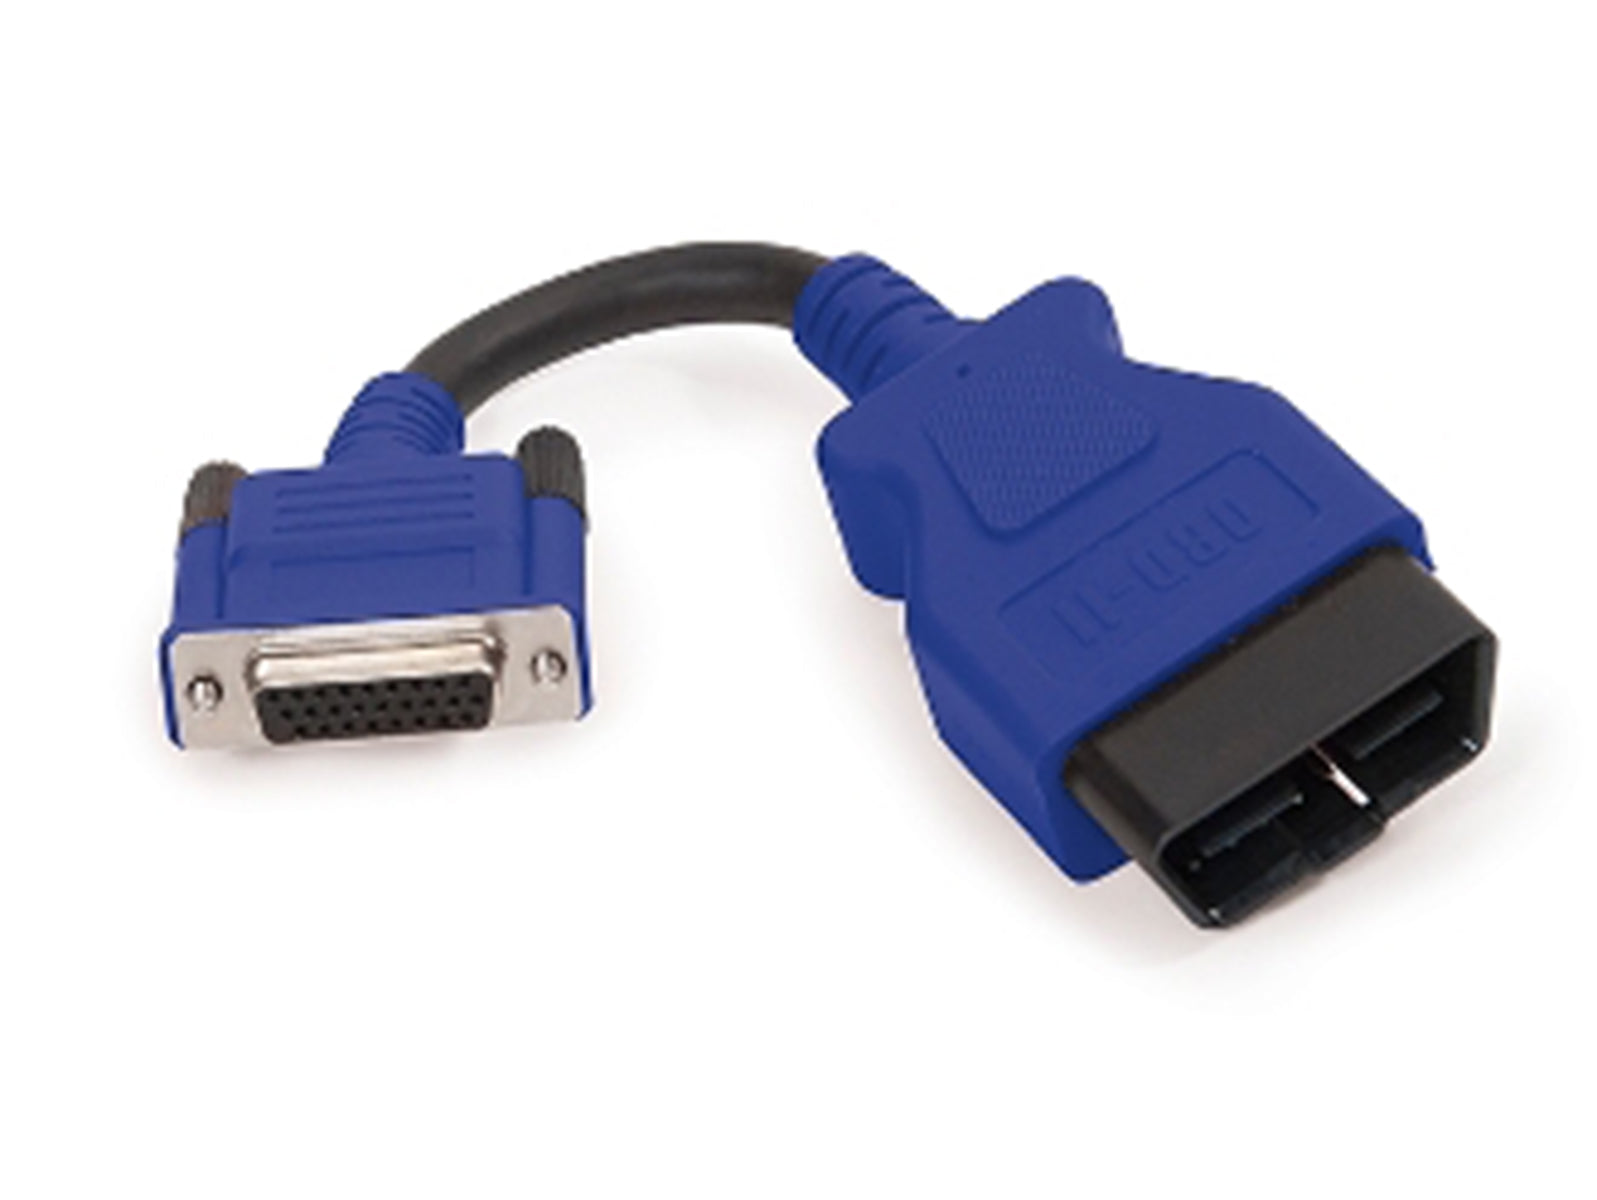 Nexiq OBDII Adapter Cable for USB Link 2 and 3